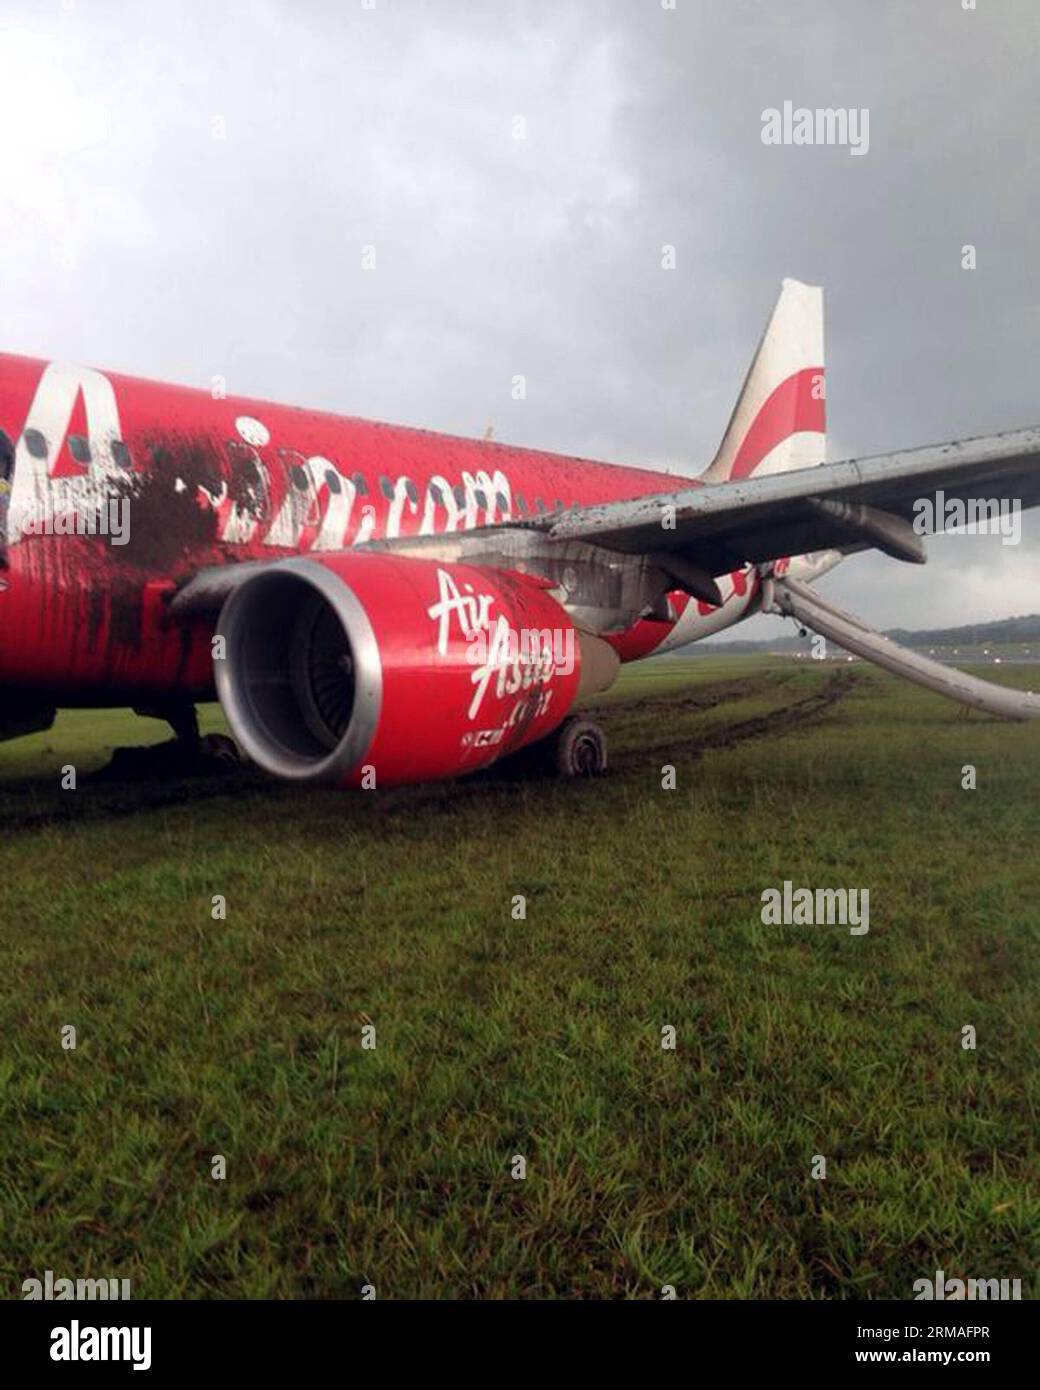 (140707) -- BANDAR SERI BEGAWAN, July 7, 2014 (Xinhua) -- The skidded plane is seen at the Brunei International Airport in Bandar Seri Begawan, Brunei, July 7, 2014. An AirAsia flight AK278 with 102 passengers and seven crew members on board from Kuala Lumpur to Brunei skidded the runway at the Brunei International Airport Monday afternoon while it was trying to land during a heavy rain in the counry. Nobody was injured in the accident. (Xinhua/Jeffrey Wong) BRUNEI-BANDAR SERI BEGAWAN-PLANE-SKID THE RUNWAY PUBLICATIONxNOTxINxCHN   Bandar Seri Begawan July 7 2014 XINHUA The skidded Plane IS Lak Stock Photo